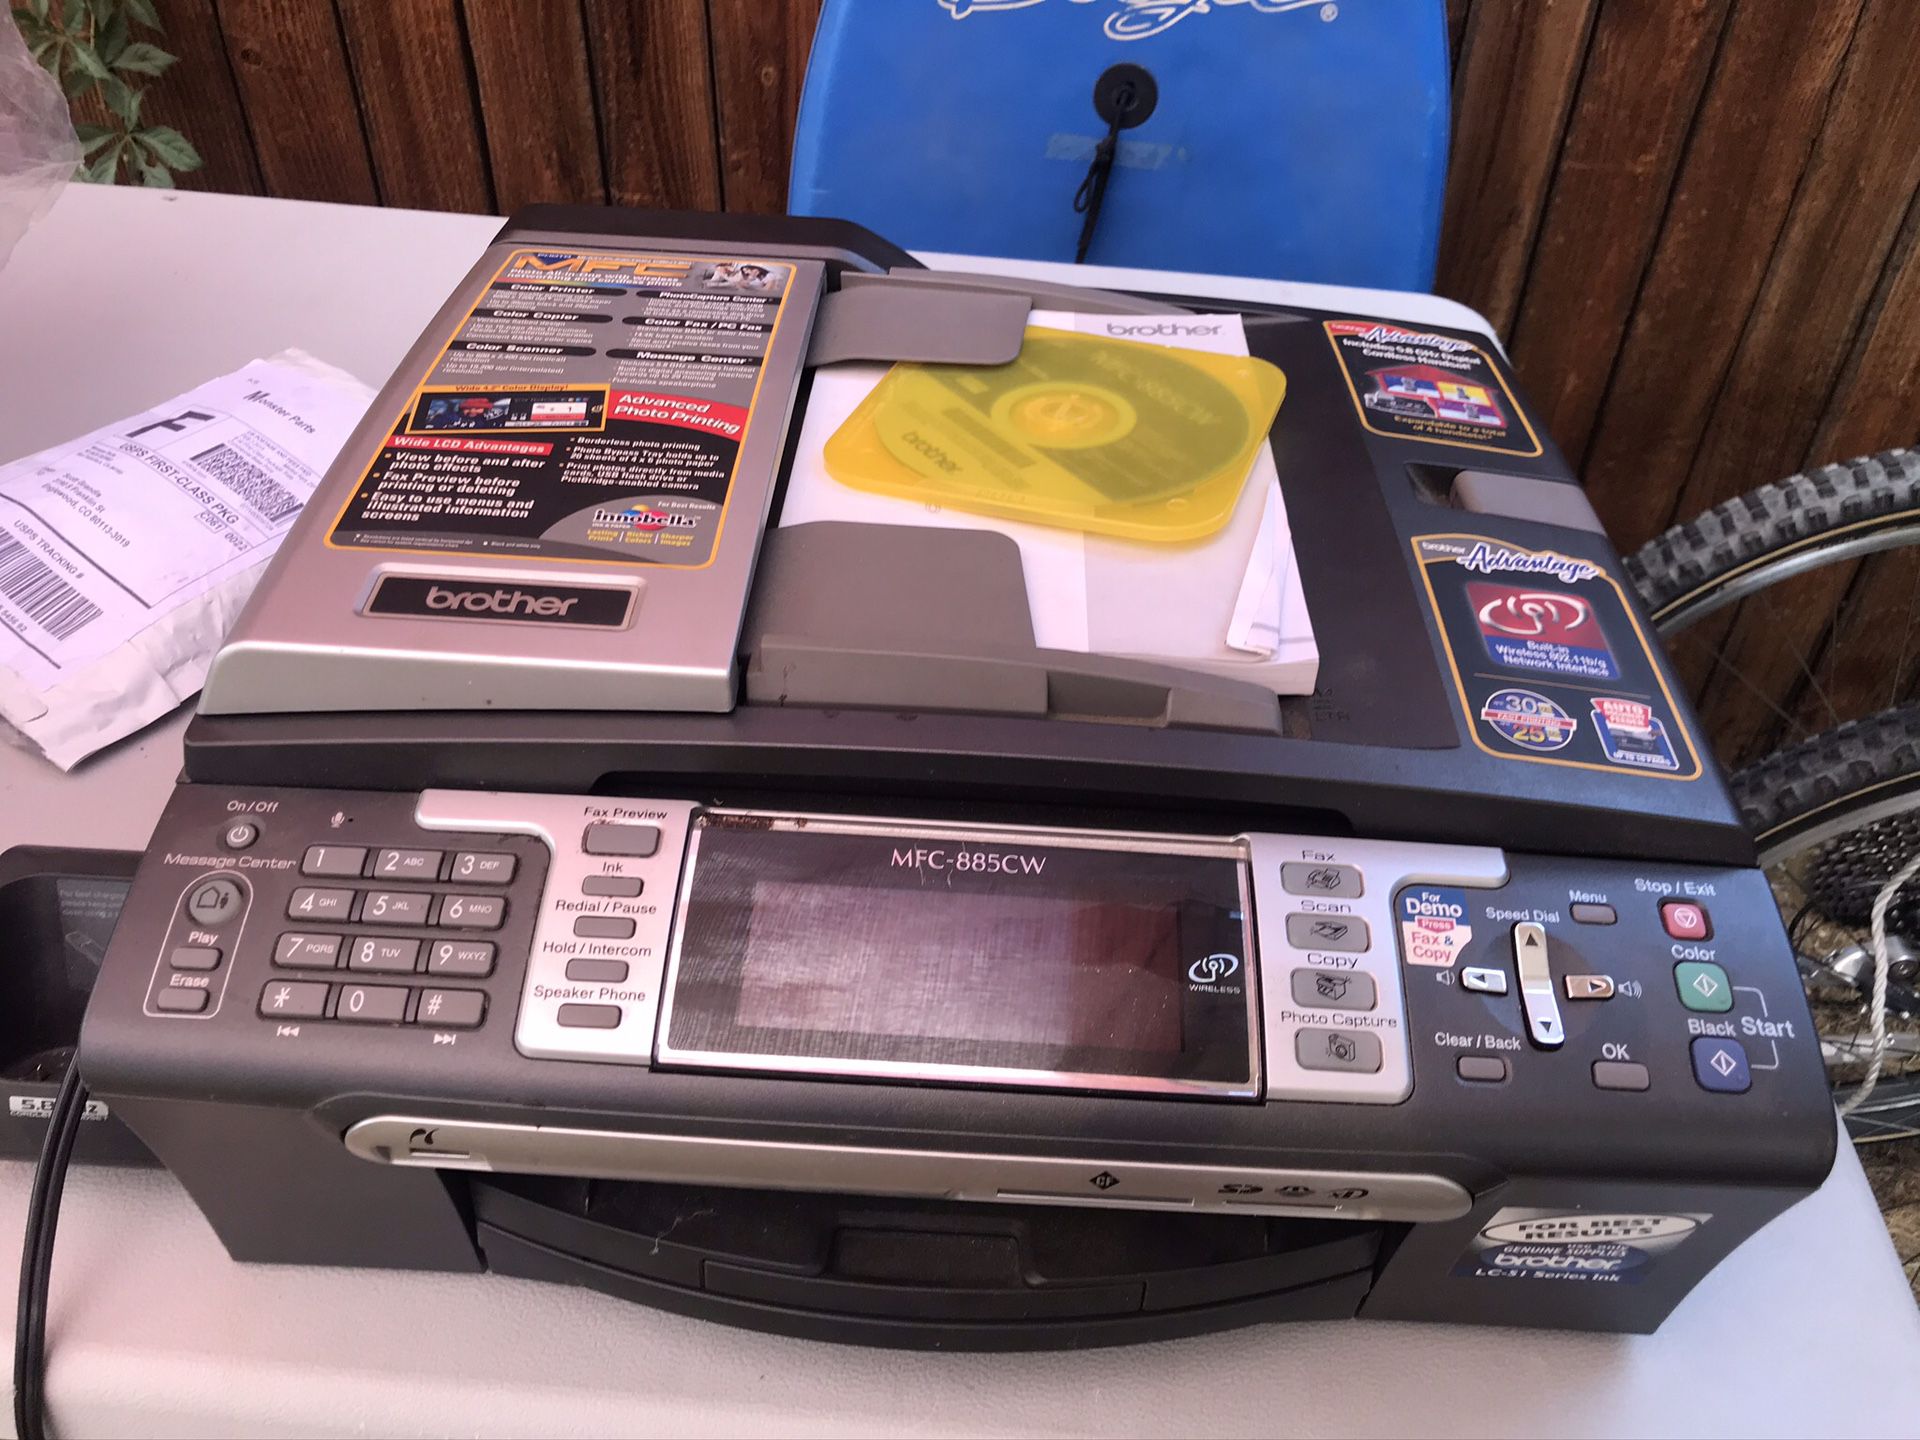 Printer with Fax and Scanner $20